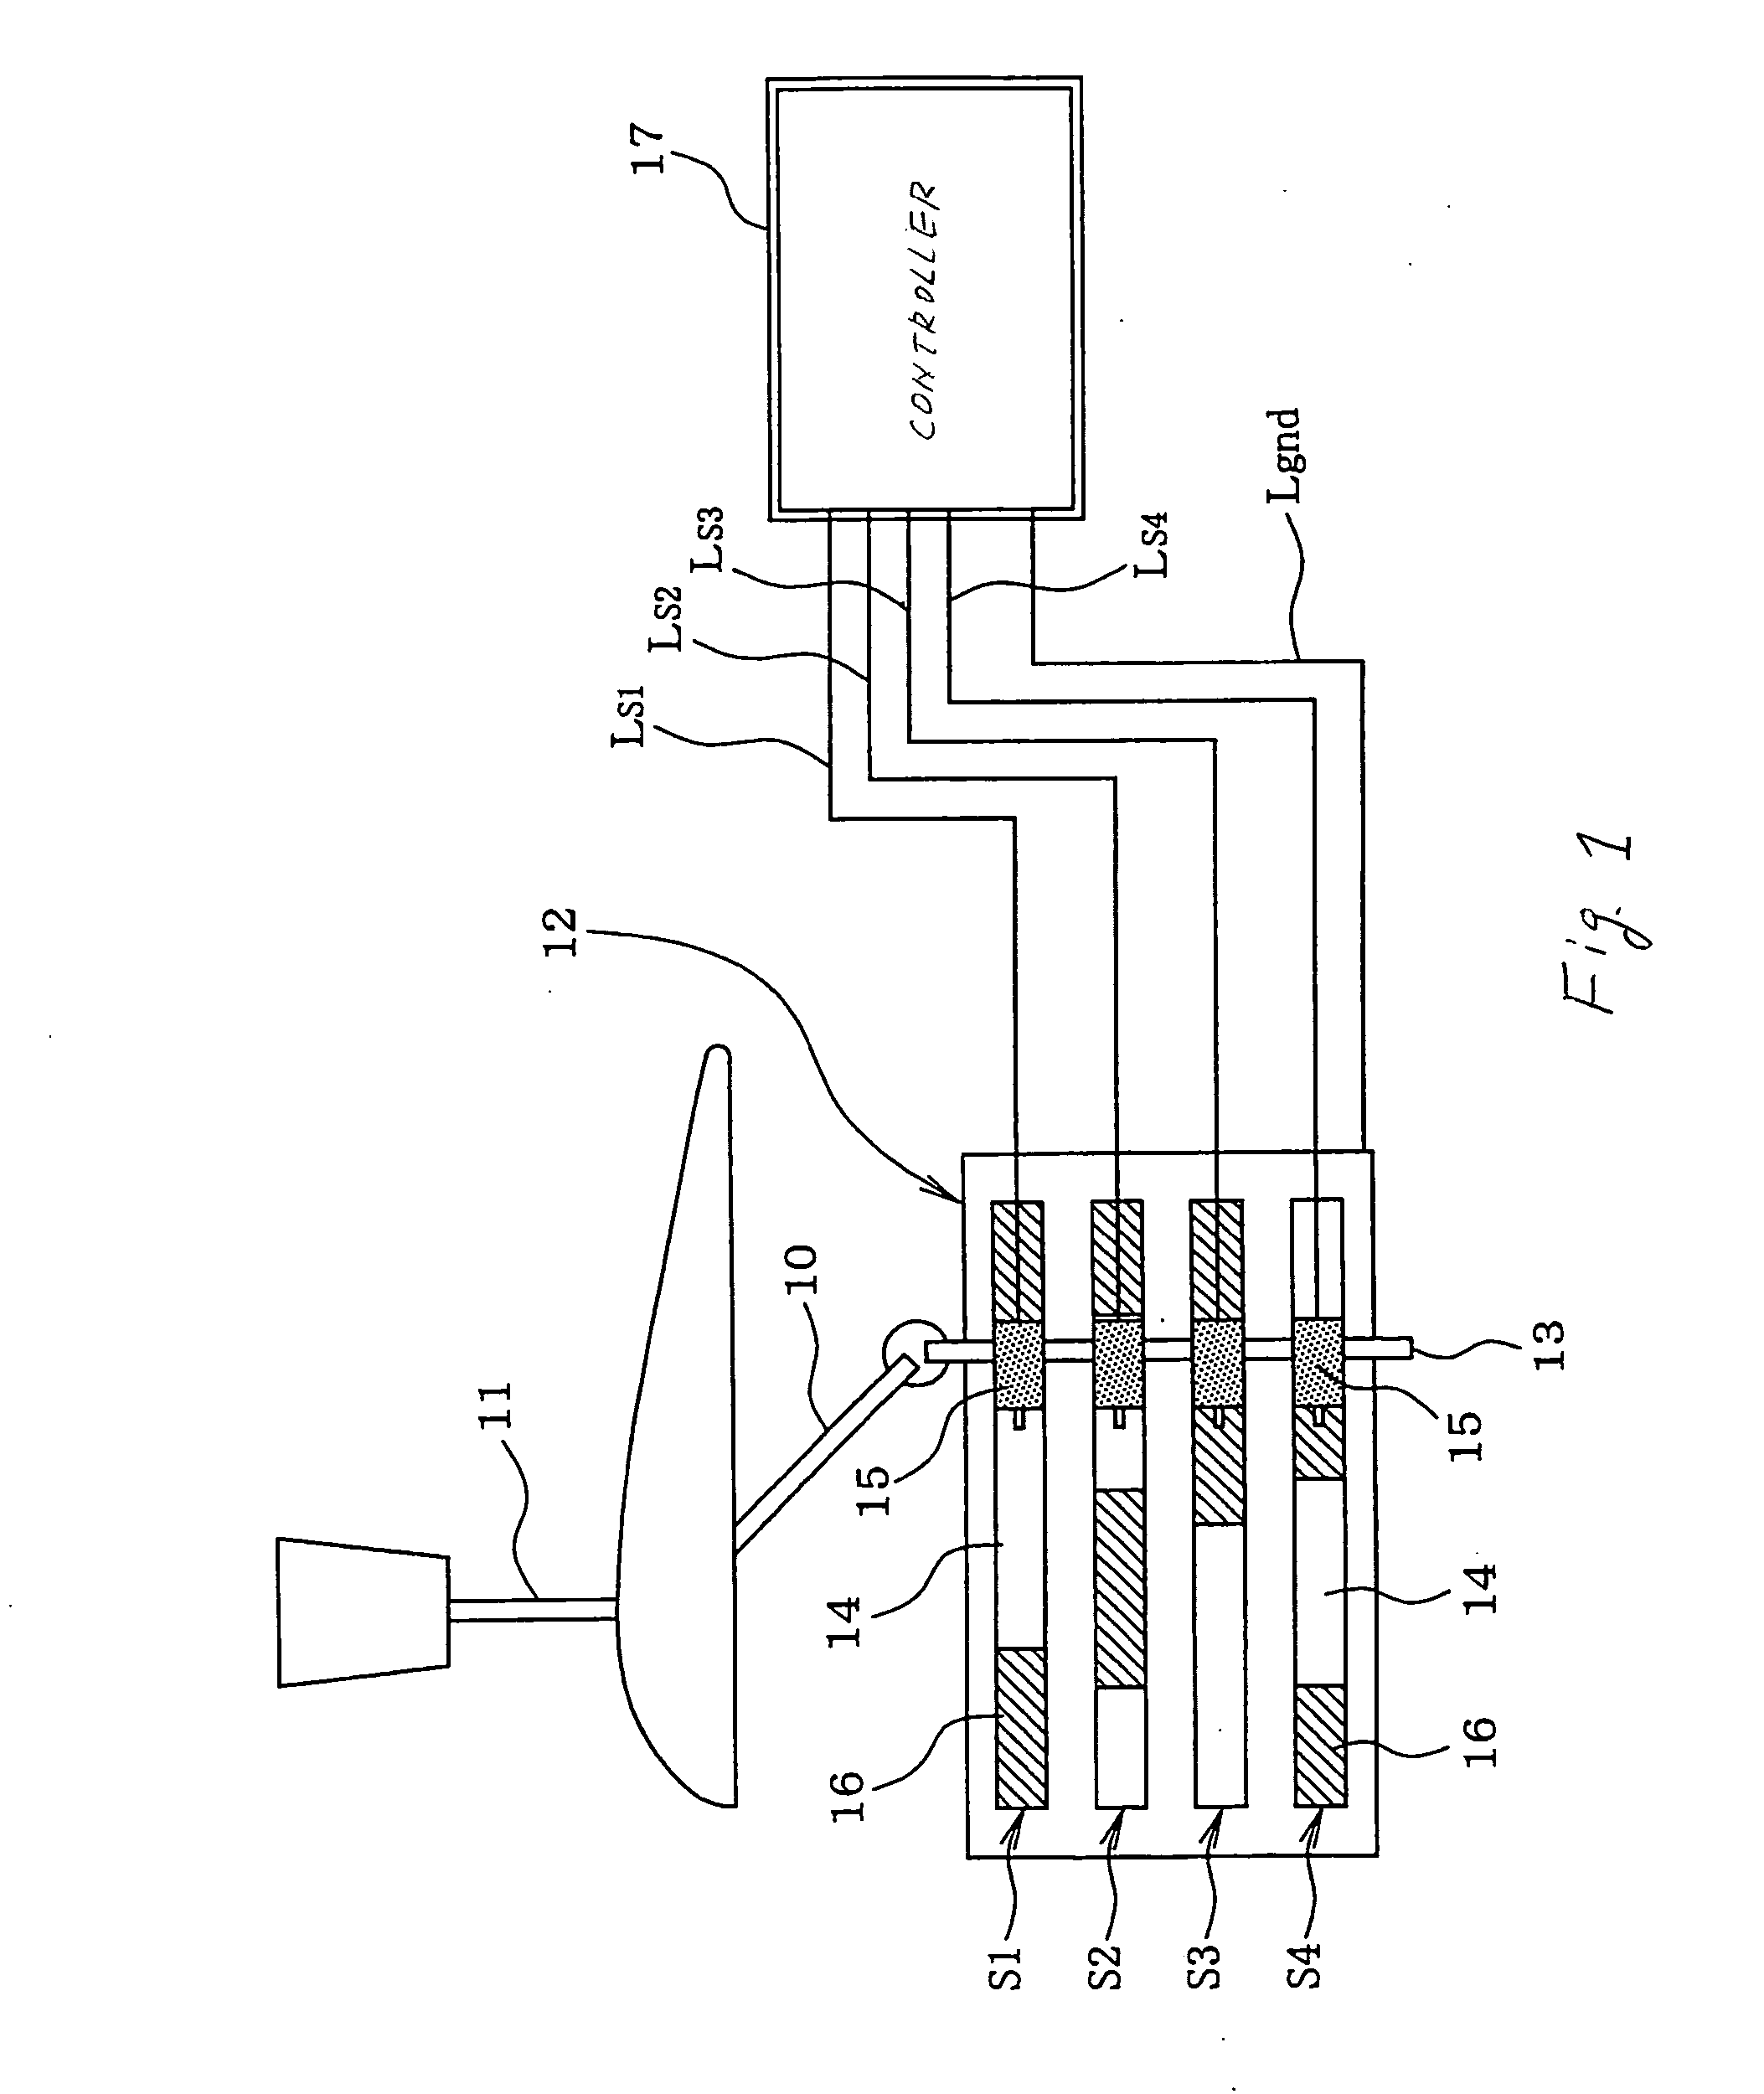 Automatic transmission control system with shift lever position sensor